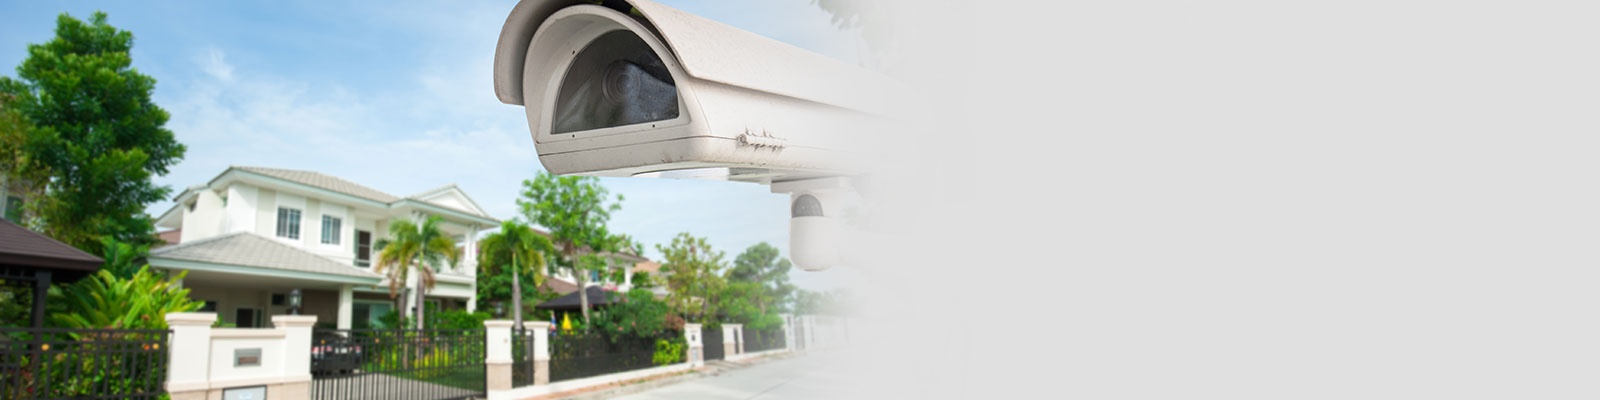 Surveillance Systems Indianapolis